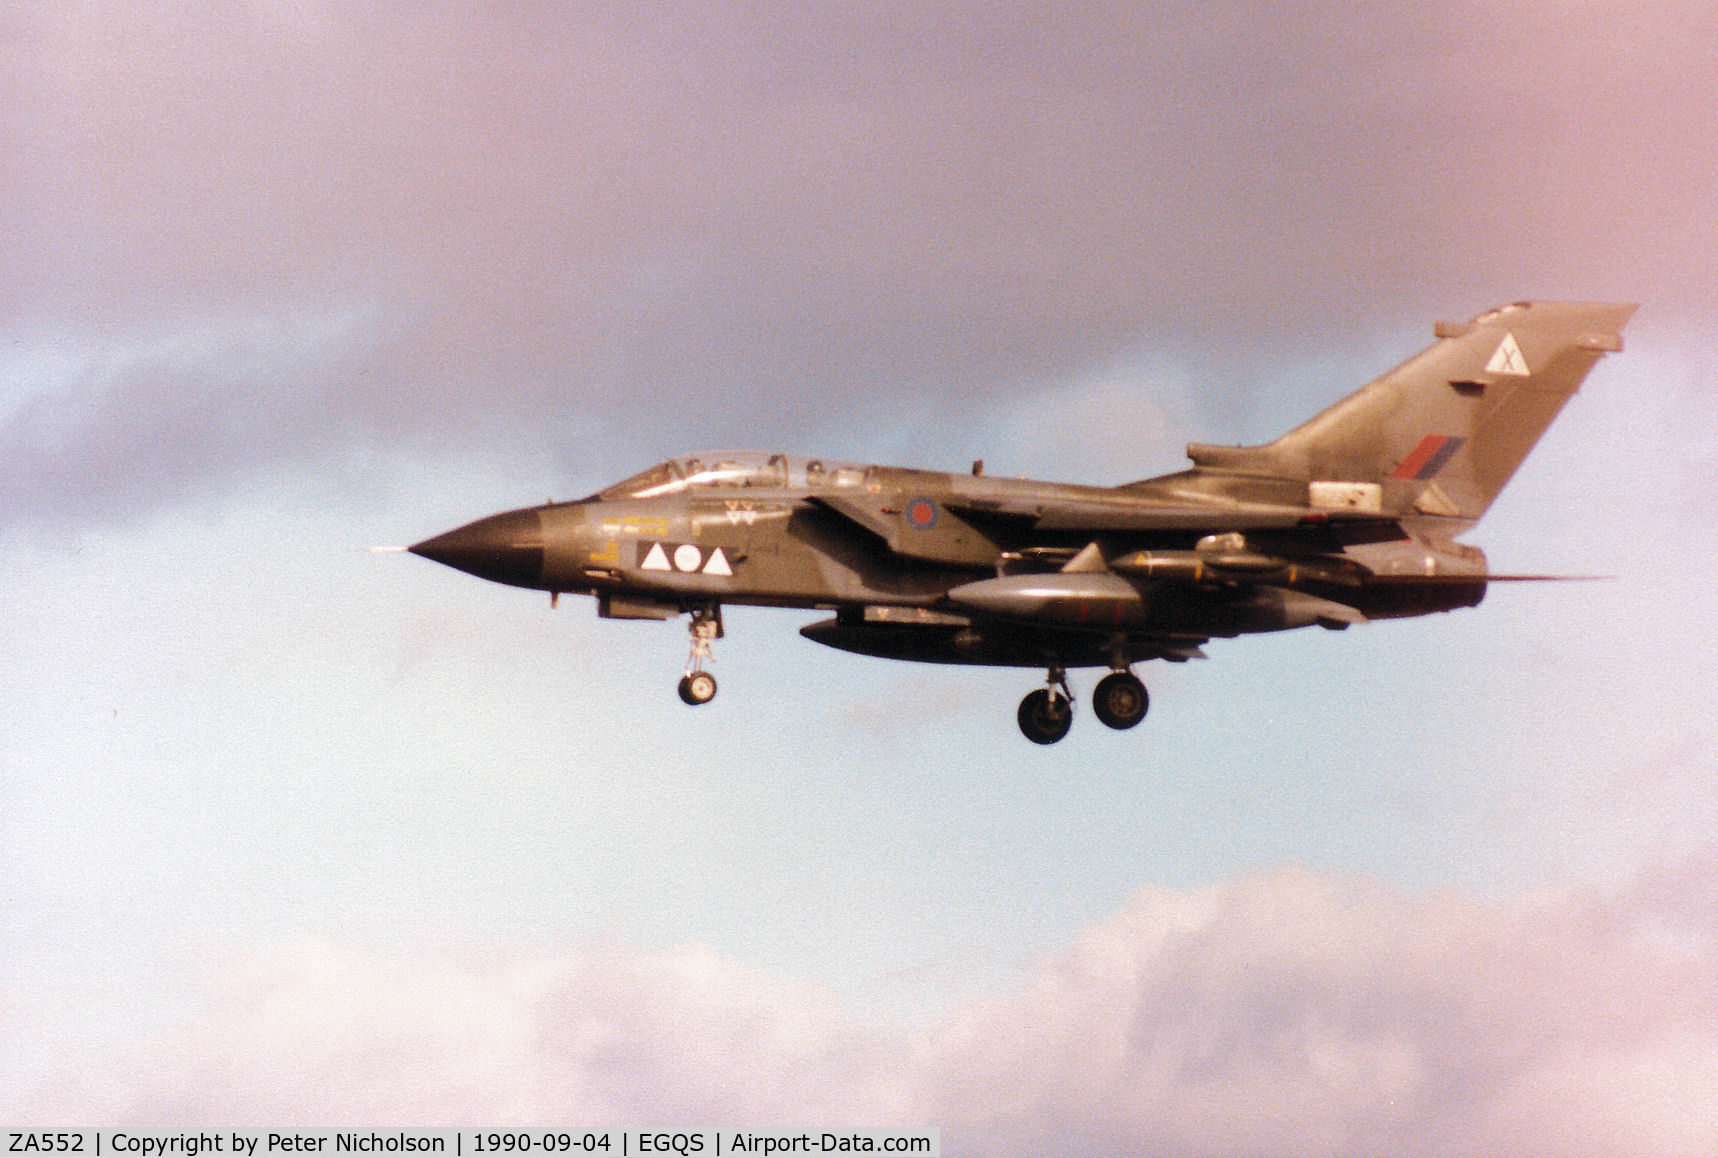 ZA552, 1981 Panavia Tornado GR.1 C/N 068/BT019/3036, Tornado GR.1 of 2 Squadron on final approach to Runway 23 at RAF Lossiemouth in September 1990.